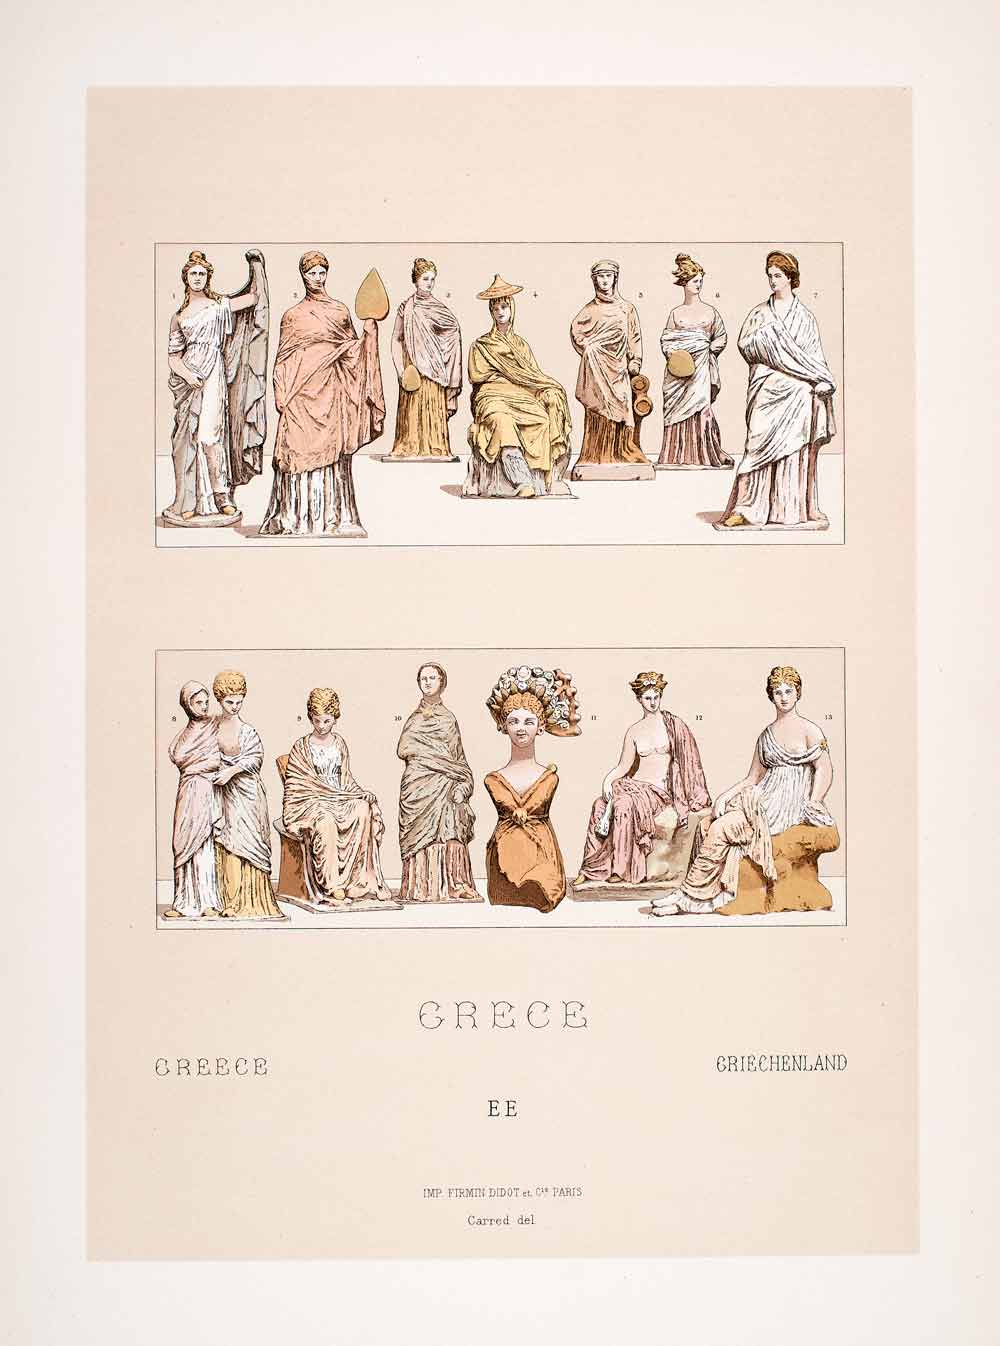 1888 Chromolithograph Ancient Greece Statue Sculpture Women Fashion Nude LCH1